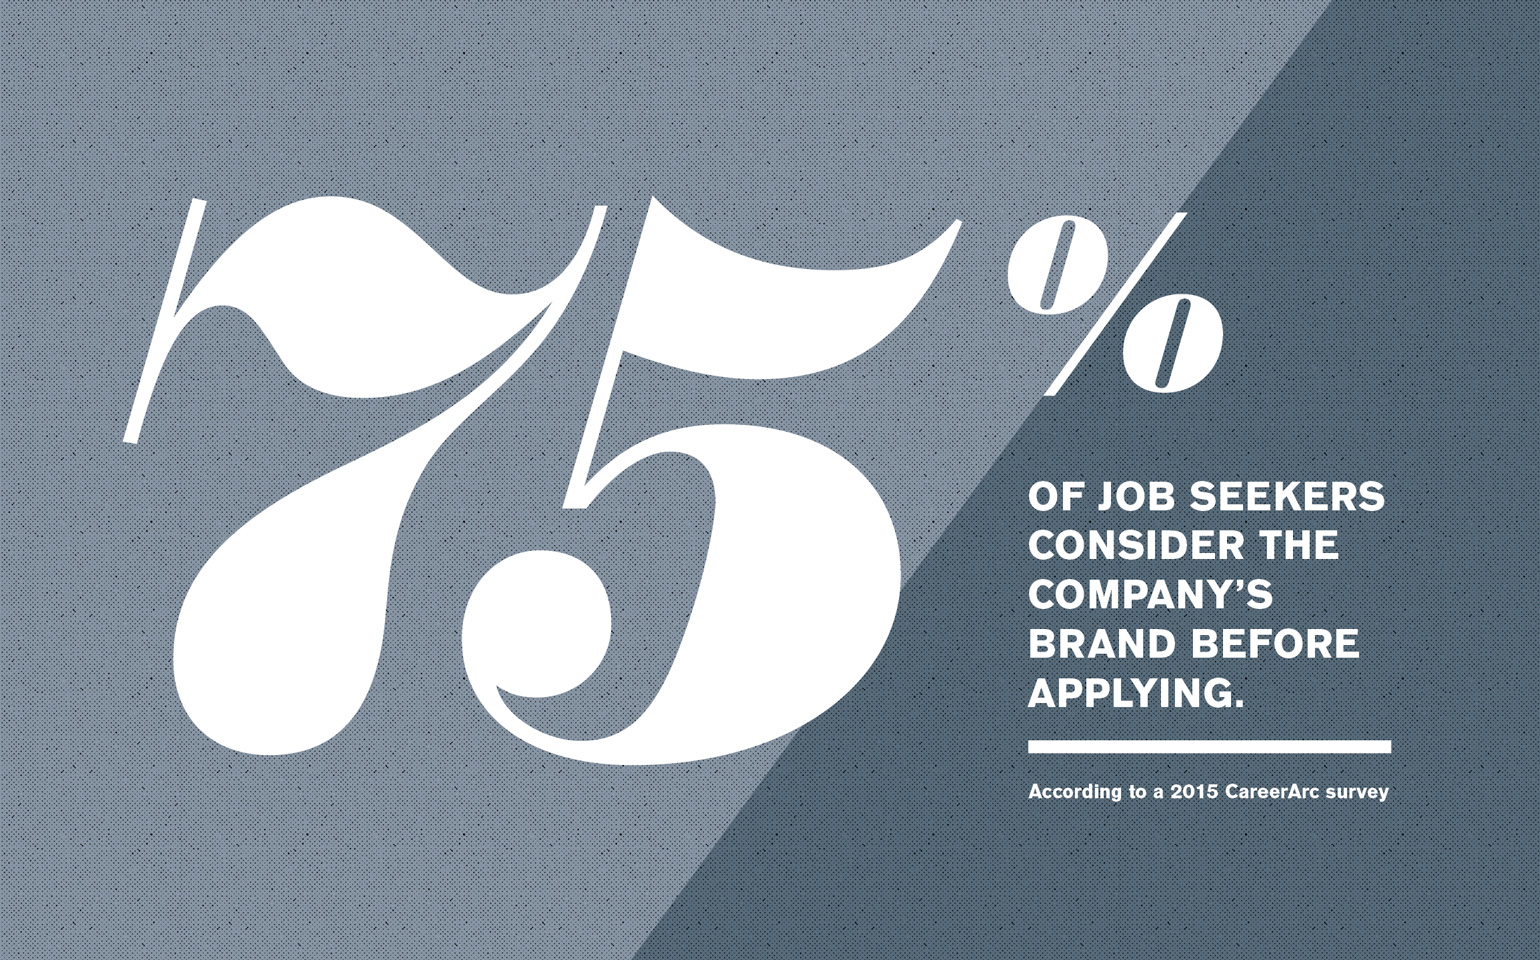 75% of Jobs Seekers Consider the Company's Brand